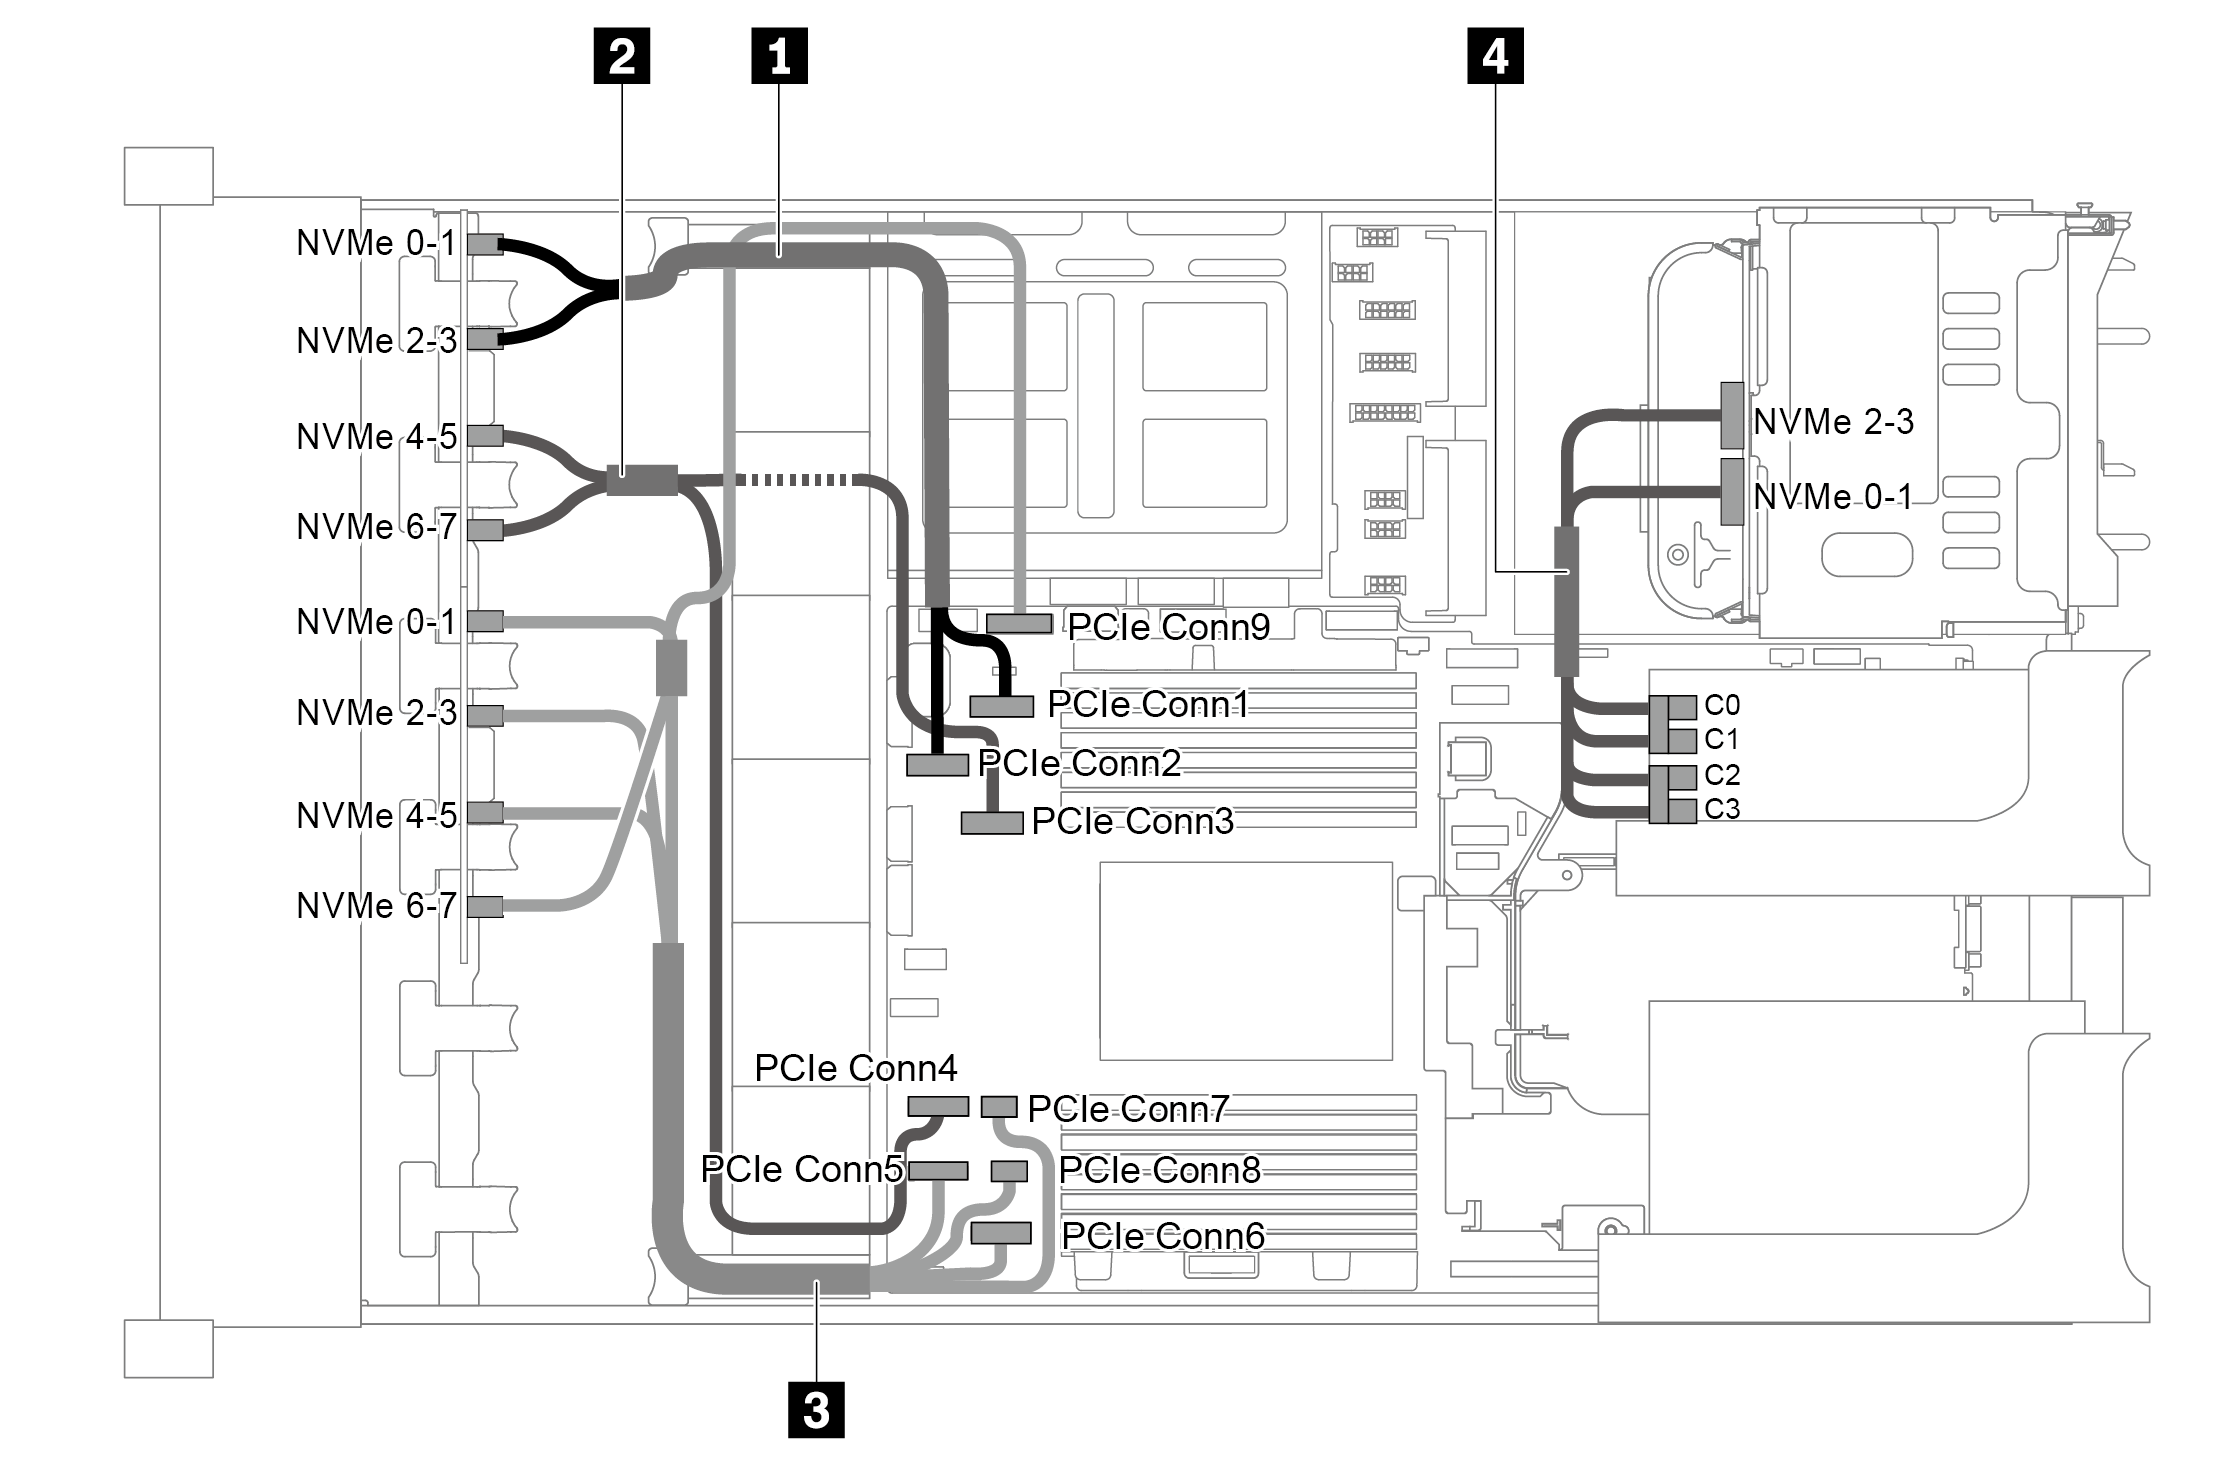 Cable routing for configuration with two 8 x 2.5" NVMe front backplanes, one rear drive cage (NVMe), and one 810-4P NVMe switch card